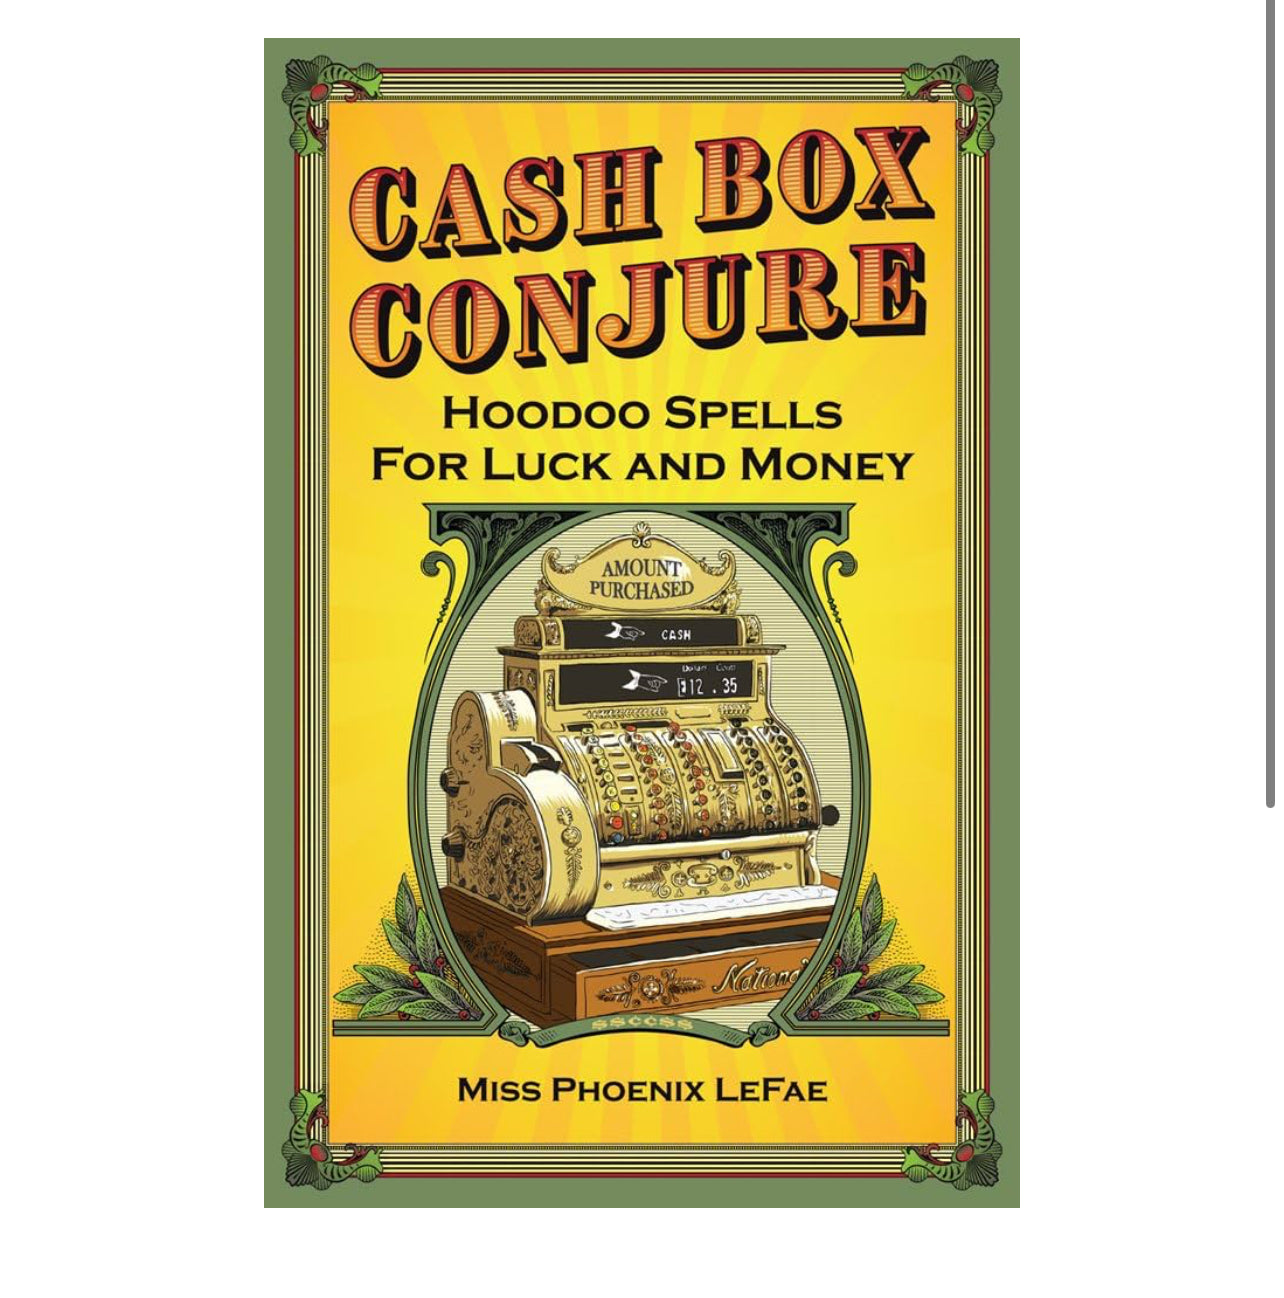 Cash Box Conjure: Hoodoo Spells for Luck and Money